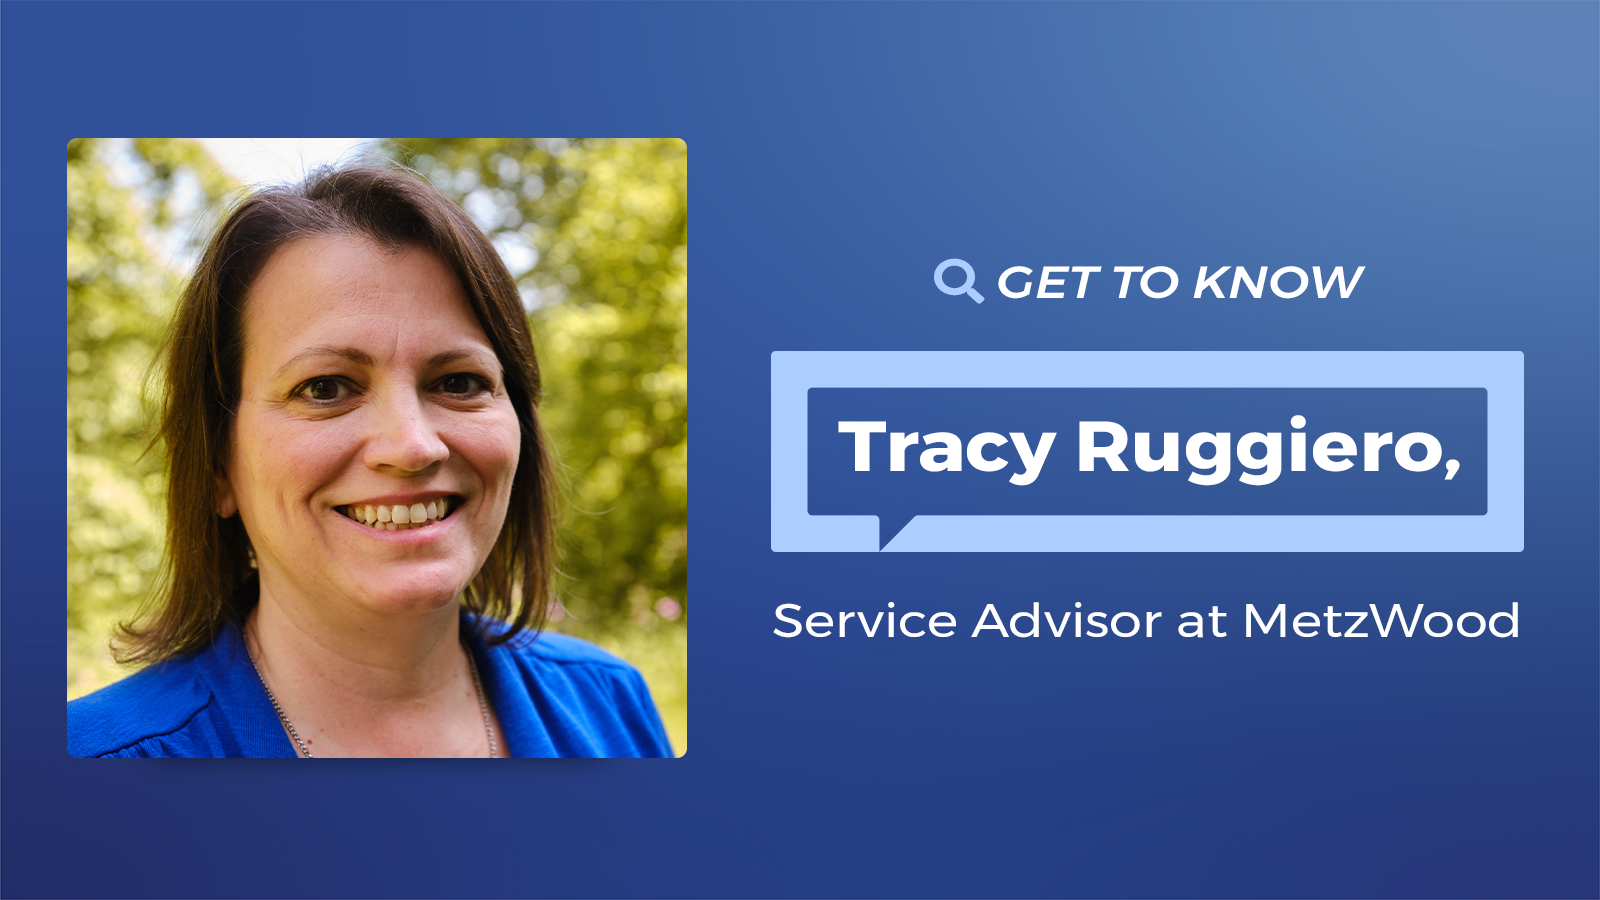 Get to know Tracy Ruggiero, Service Advisor at MetzWood